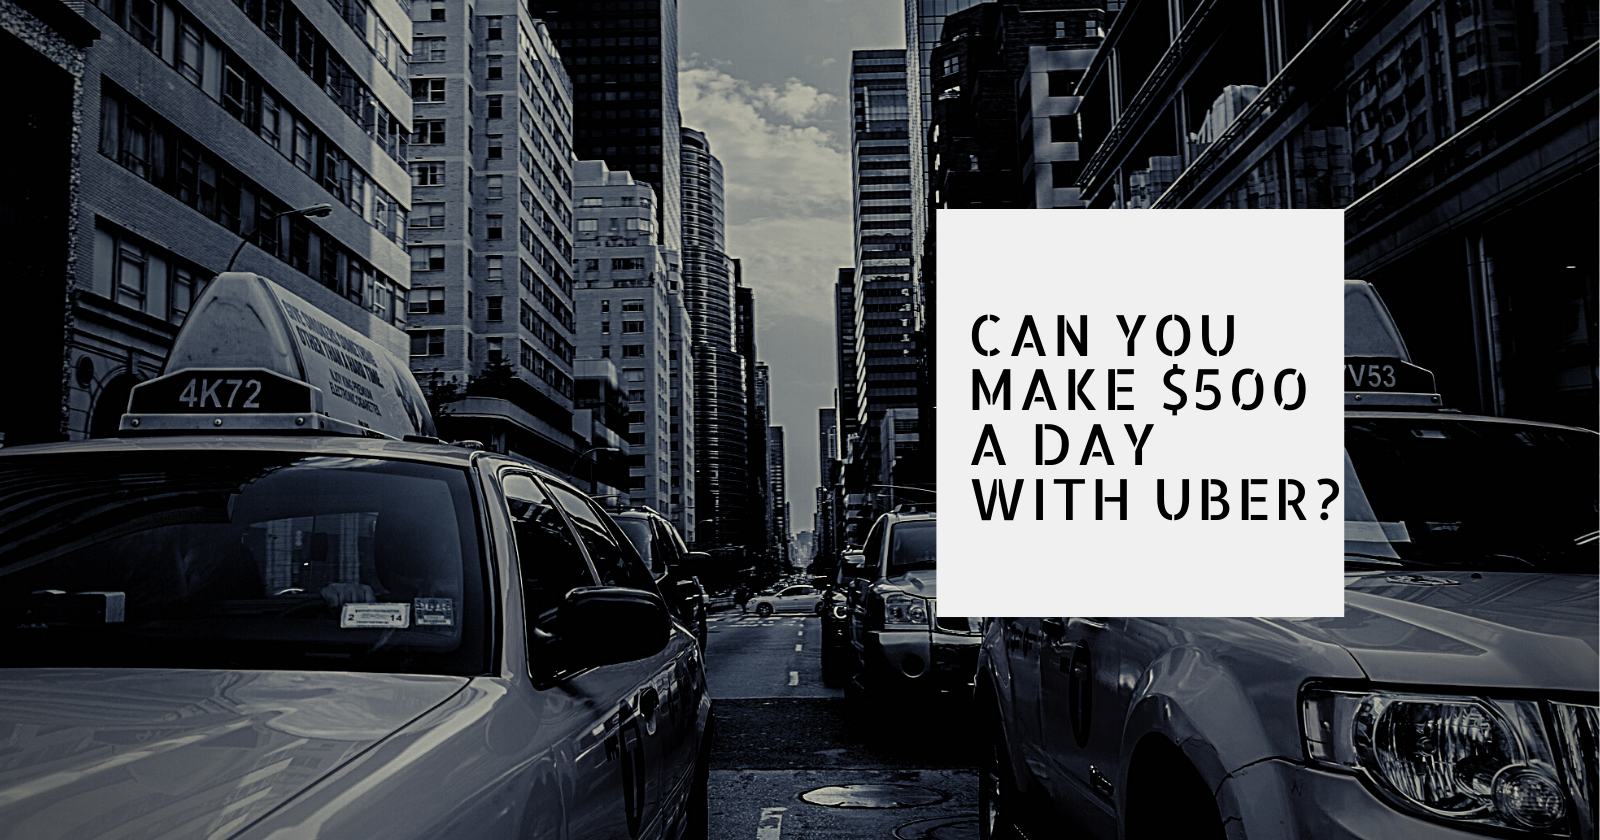 Can you make $500 a day with Uber